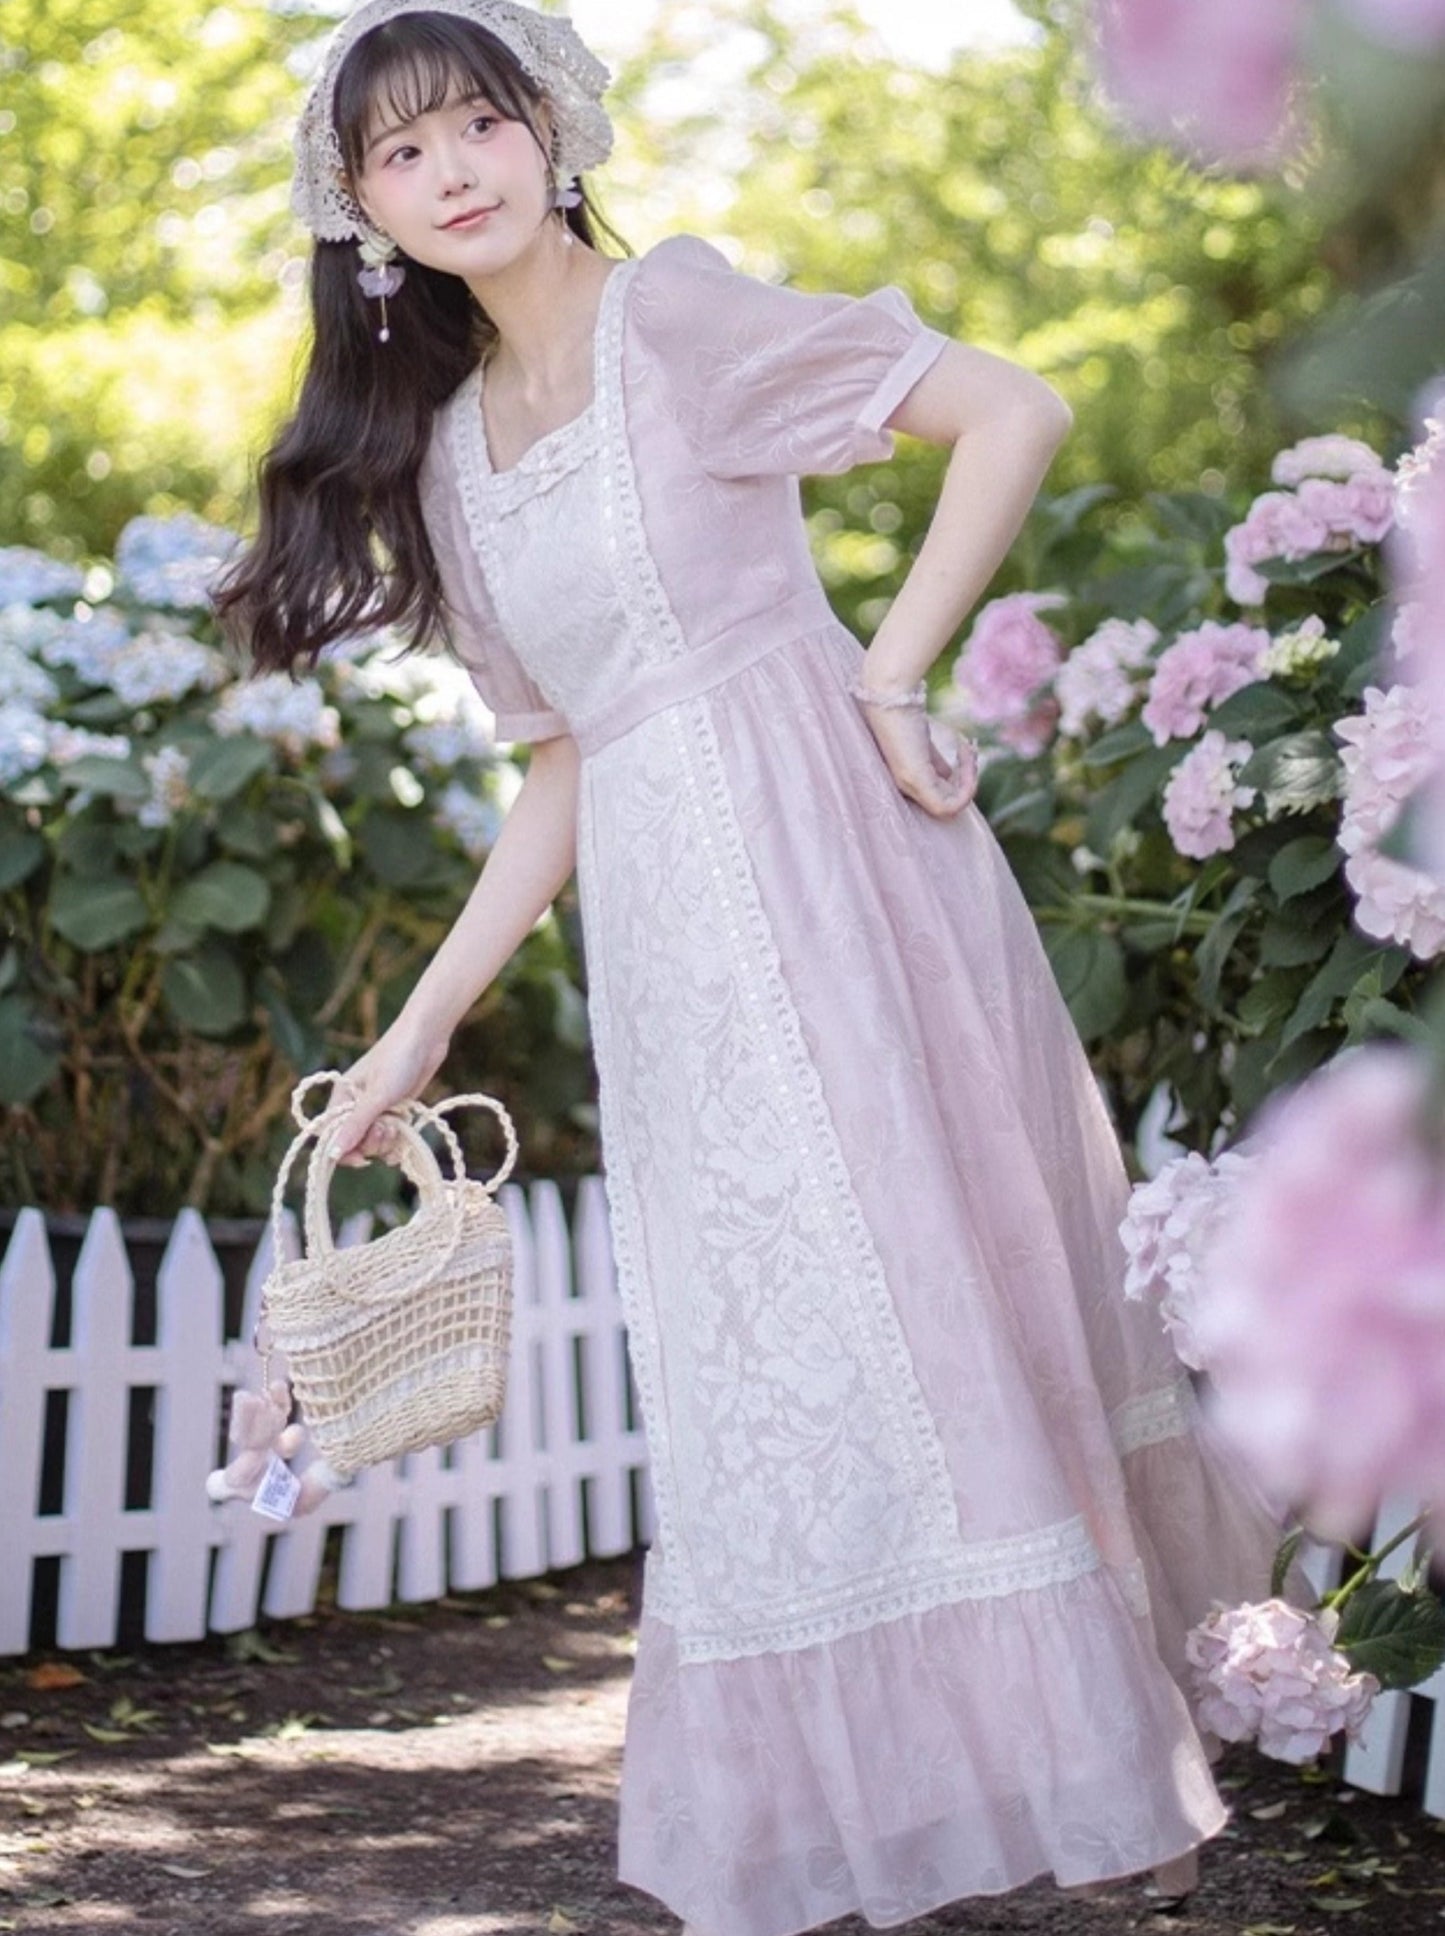 Article préférentiel : Heartbeat blooming forest dress 199 yuan a detail page to receive a coupon to place an order